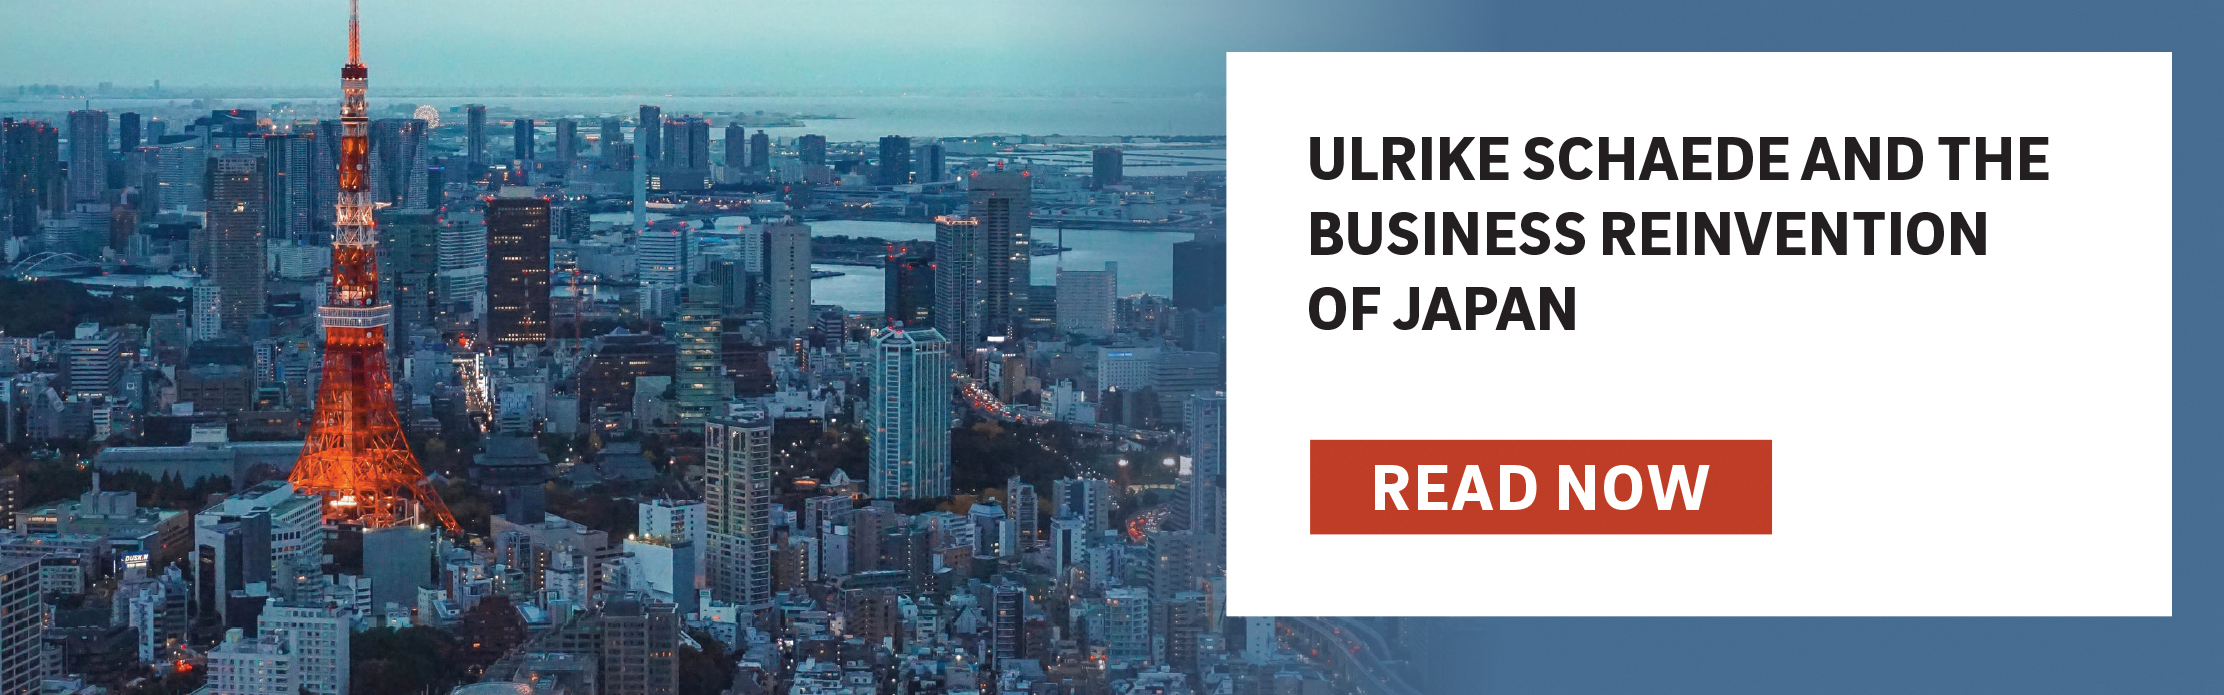 Ulrike Schaede and the business reinvention of Japan 